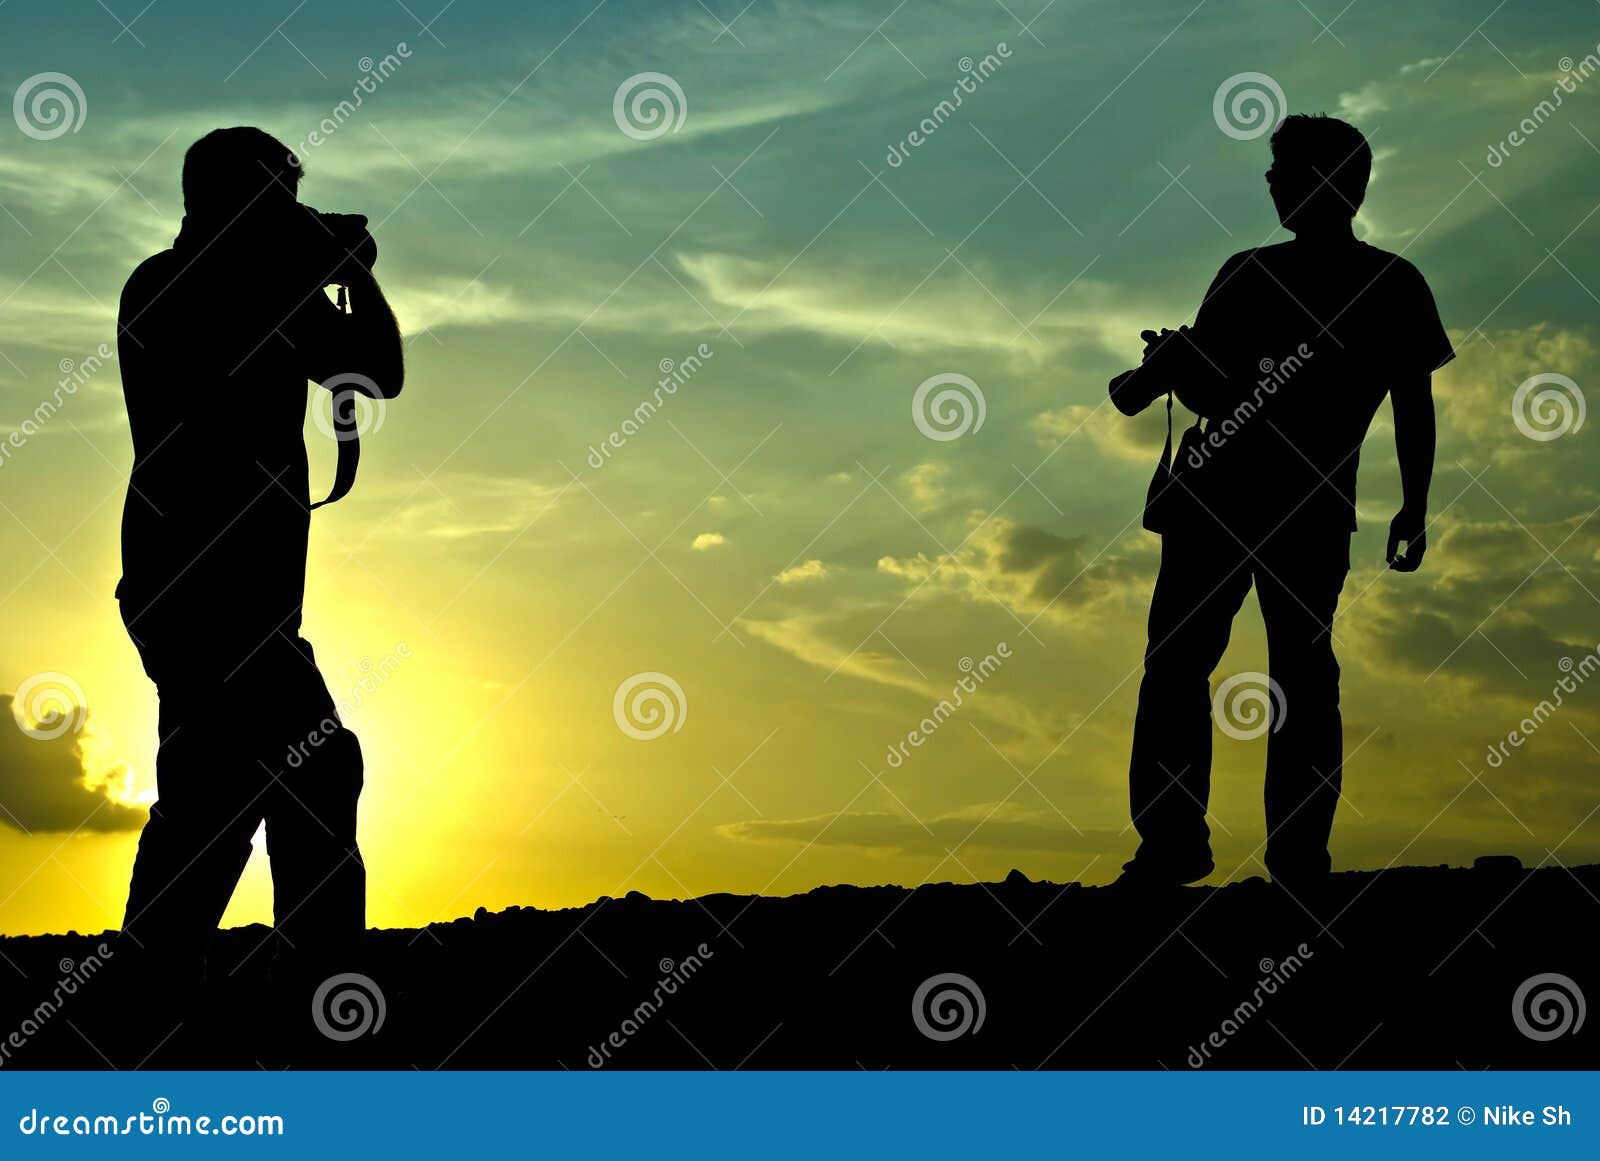 silhouette: the photographer photographed